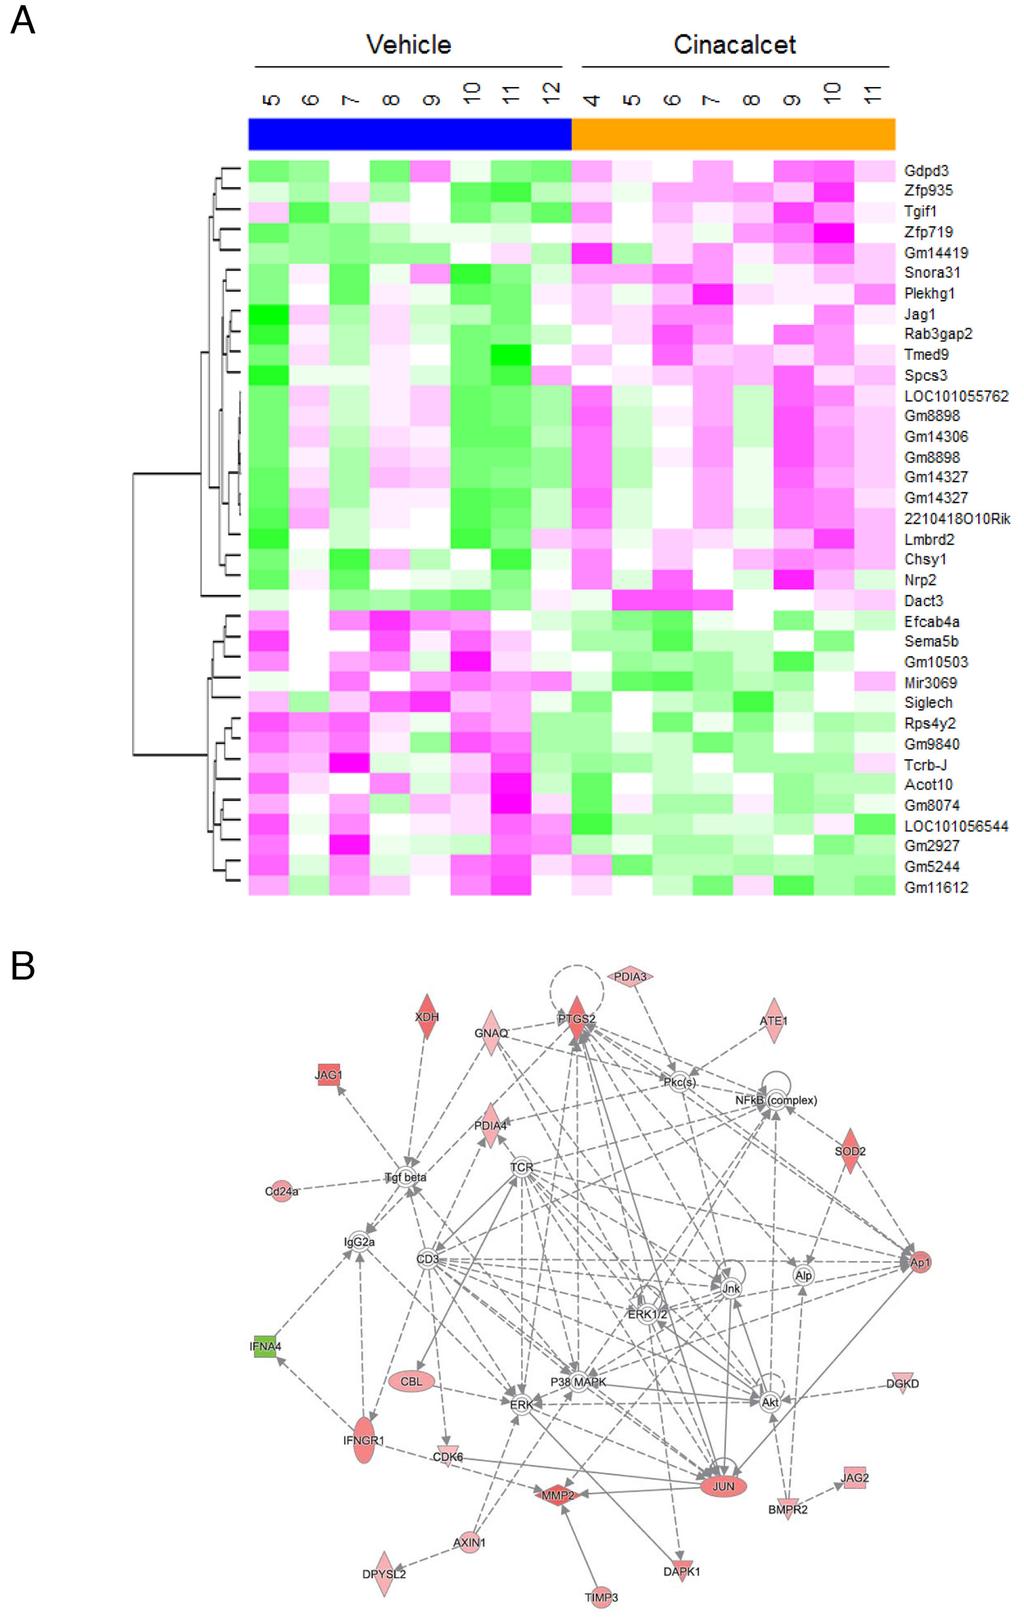 Supplementary Figure S5: Genome-wide expression analyses of murine genes in cinacalcet-treated LA-N-1 xenografts. A.